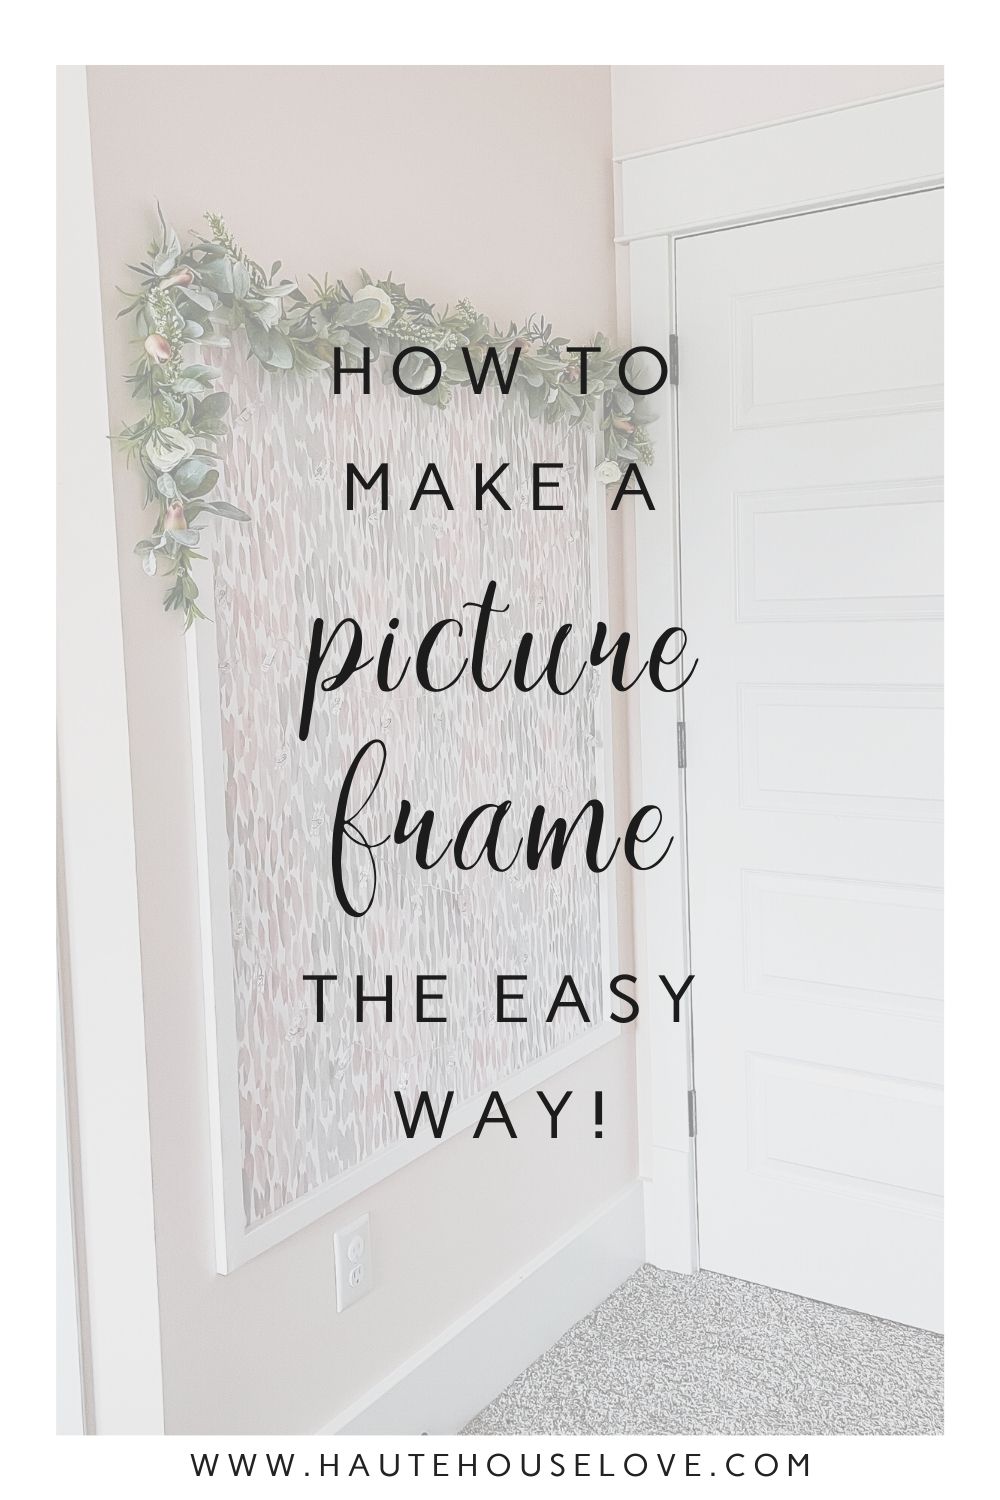 How To Make A Picture Frame – The Easy Way